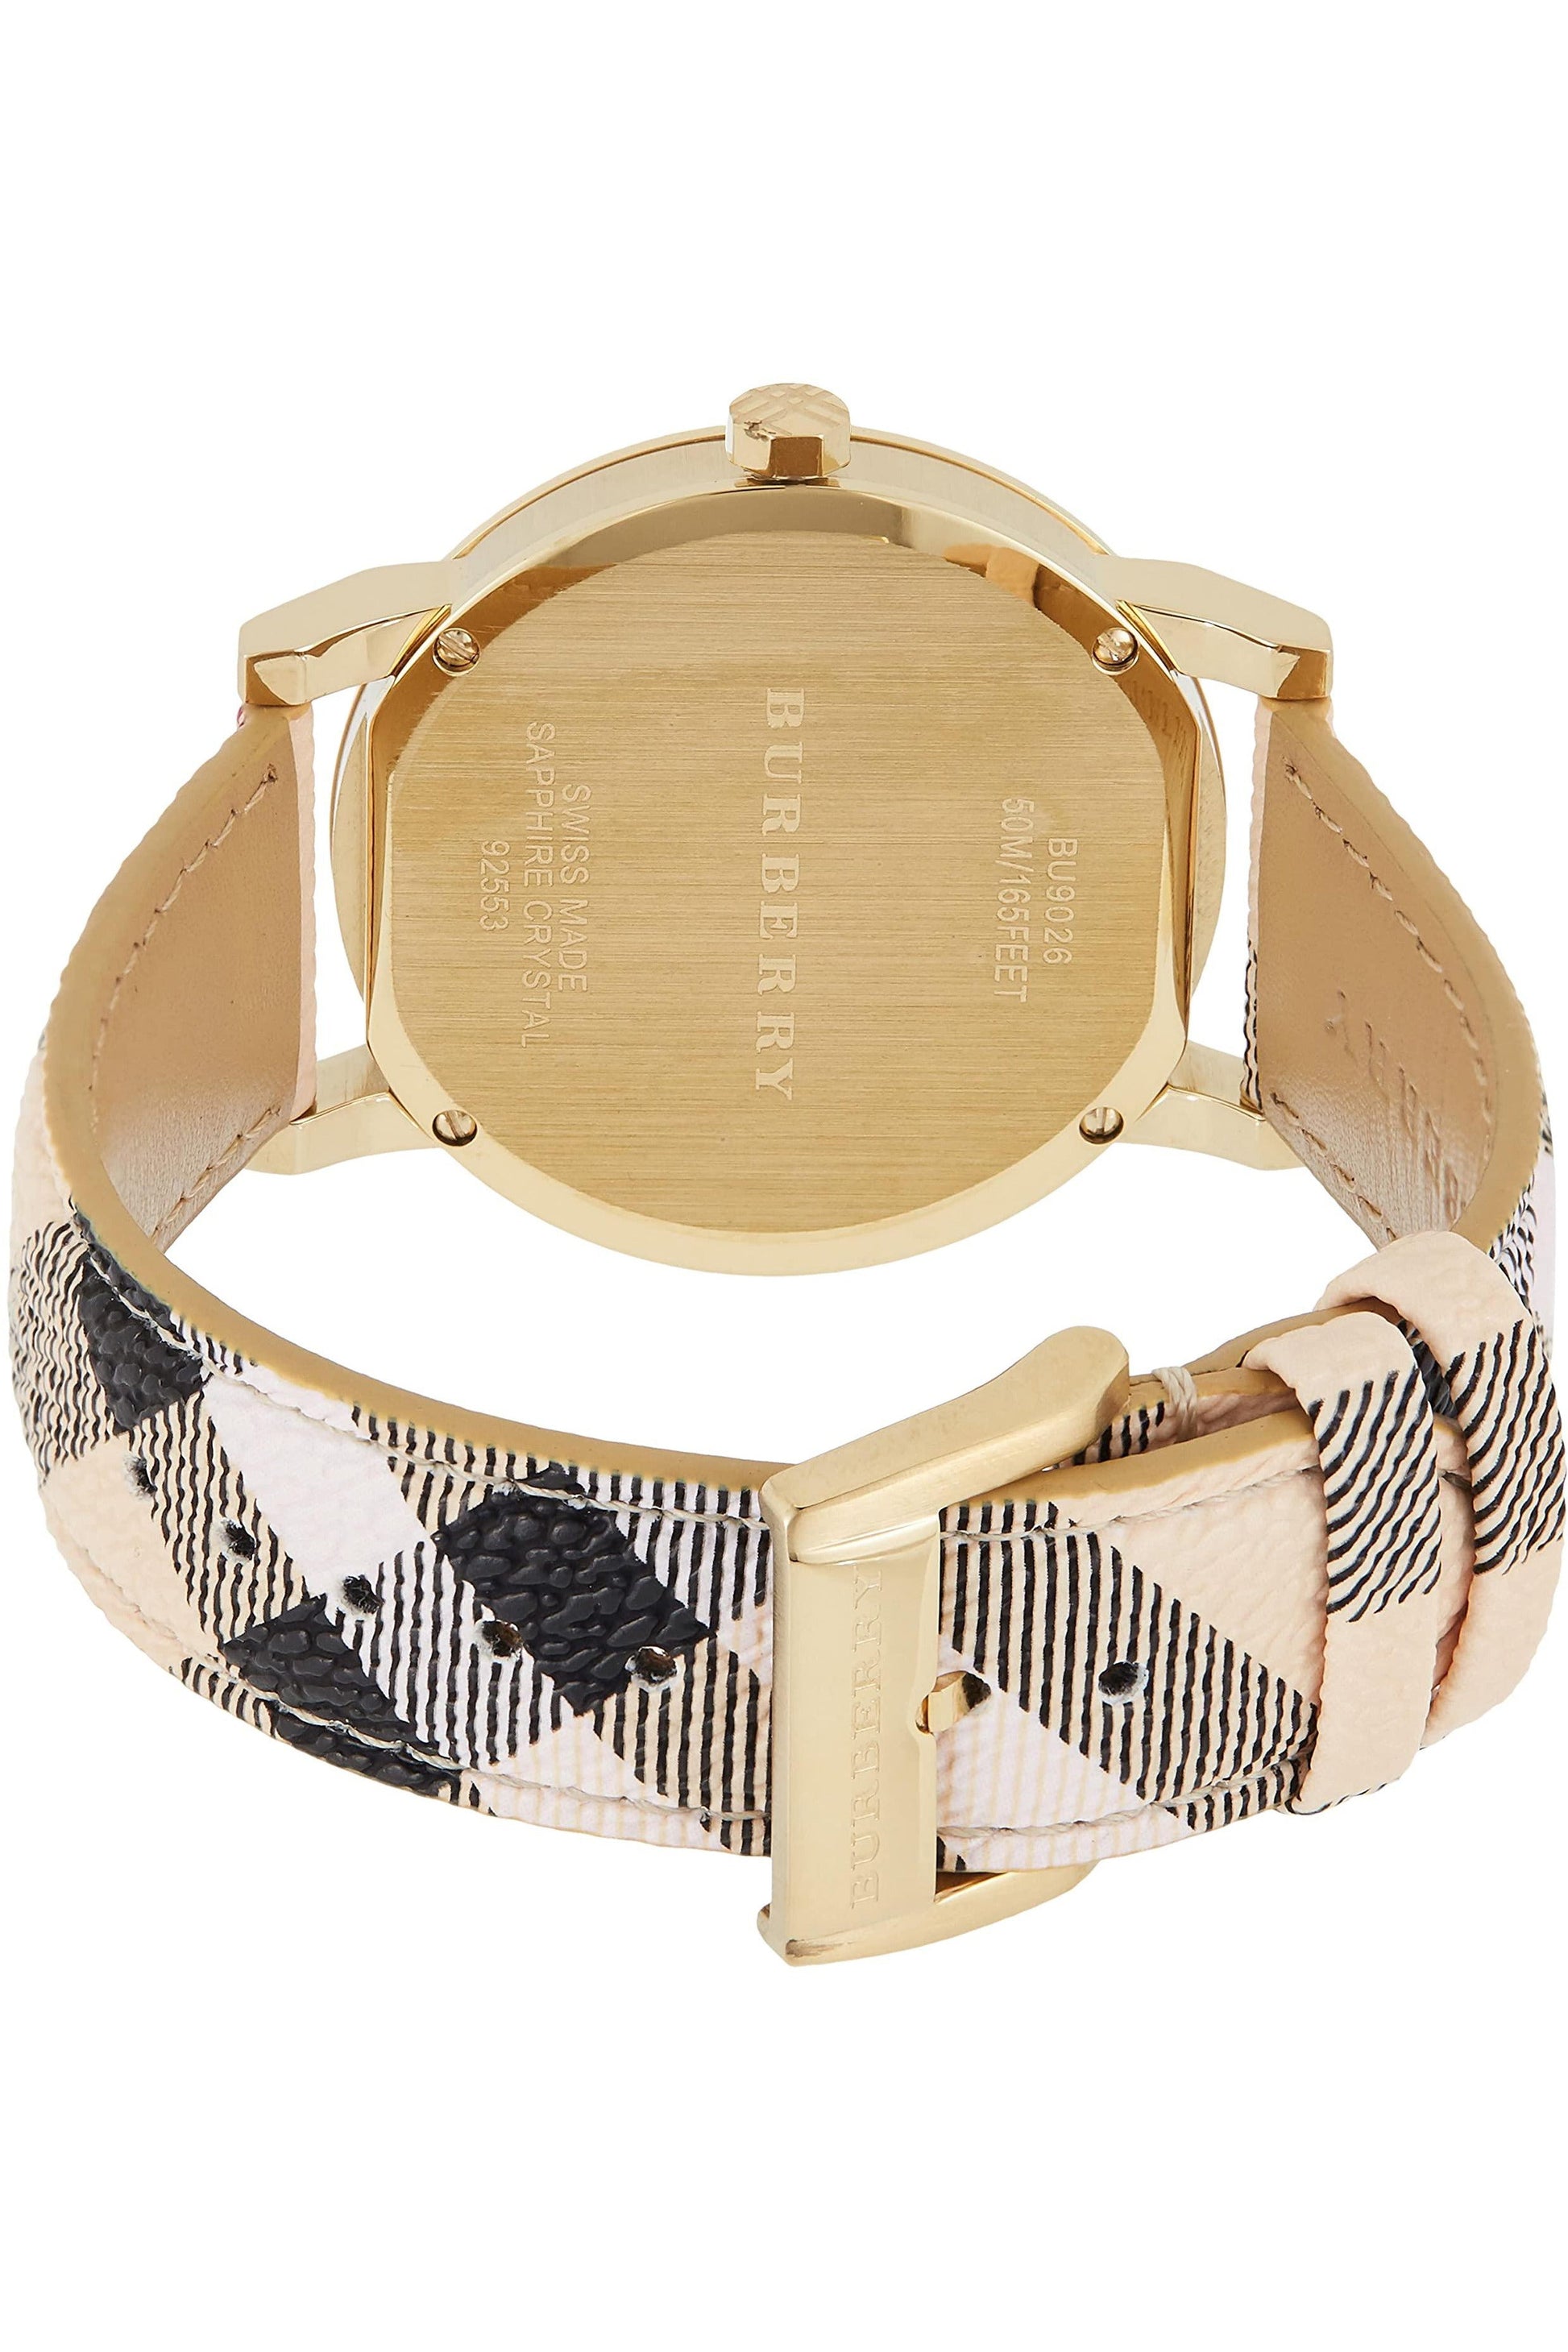 Burberry The City Gold Dial Beige Leather Strap Watch for Women - BU9219